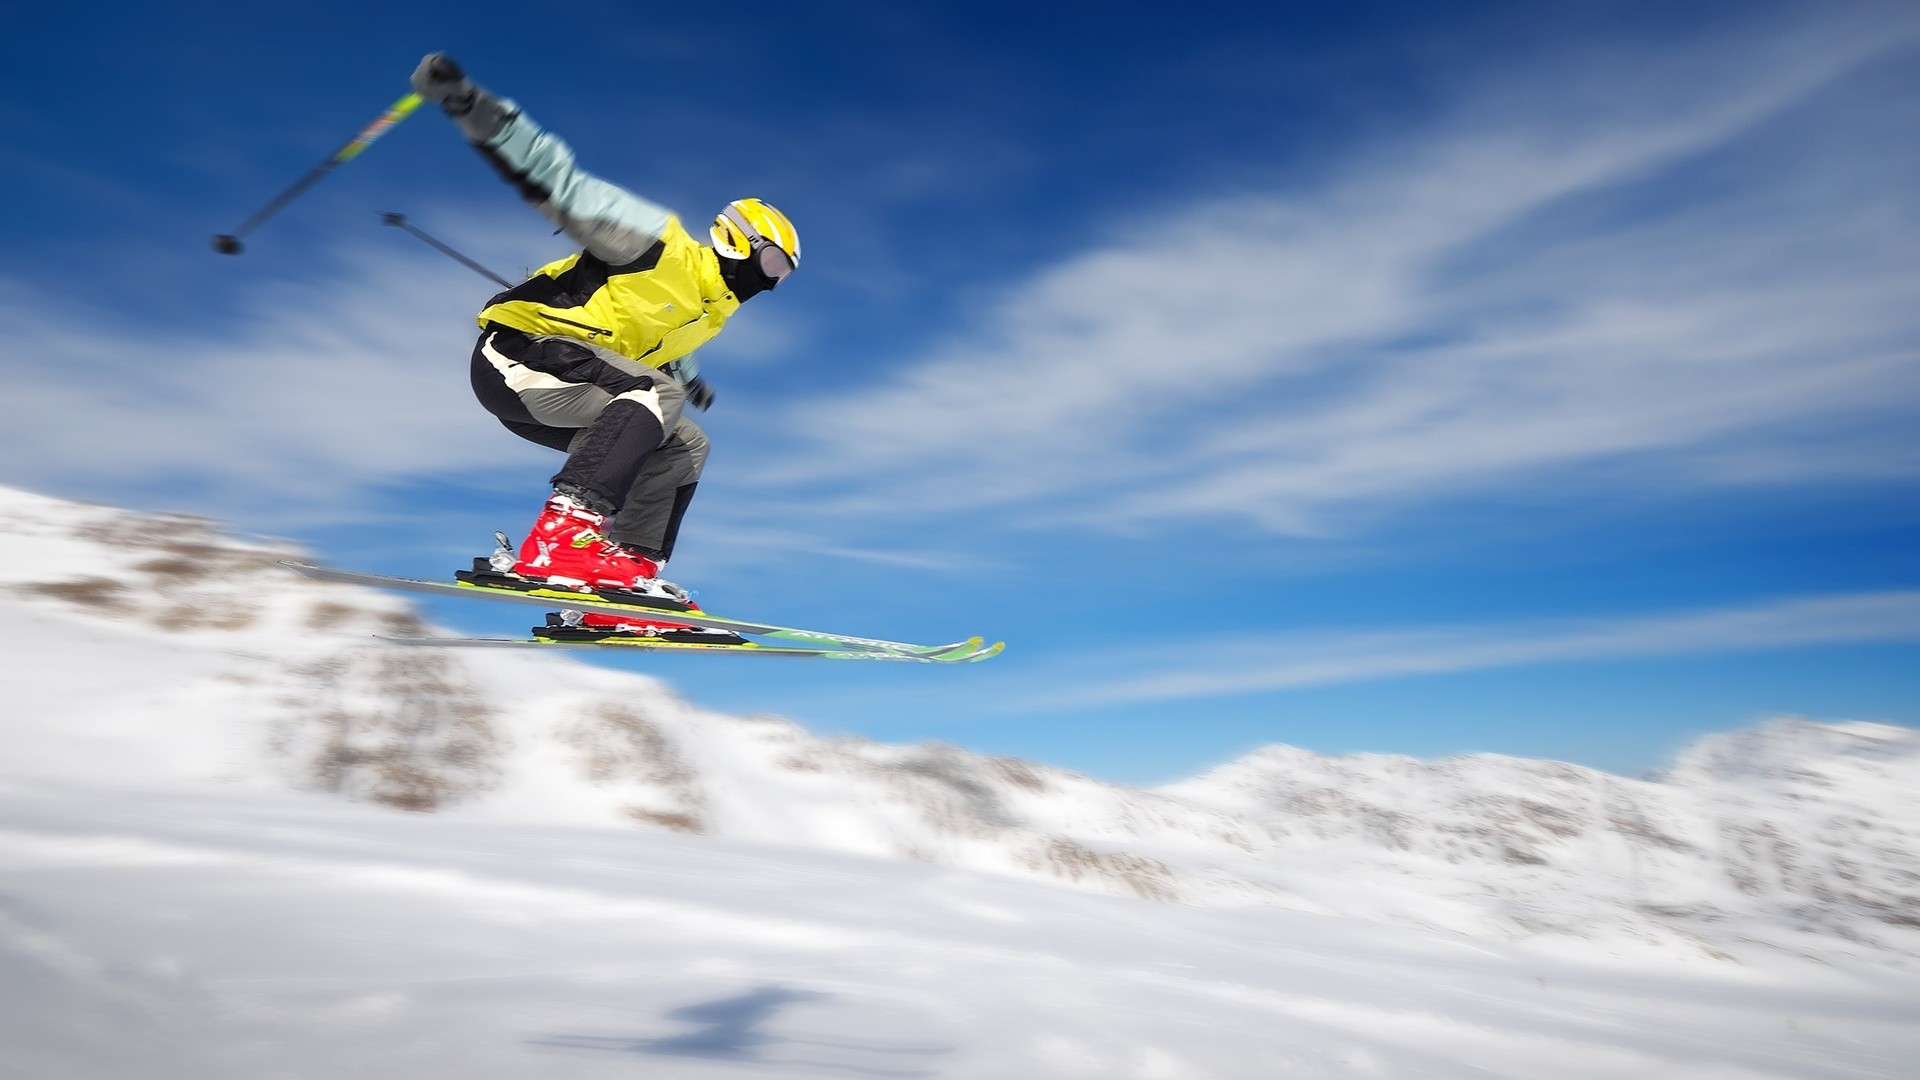 Skiing Desktop HD Wallpaper And Make This For Your